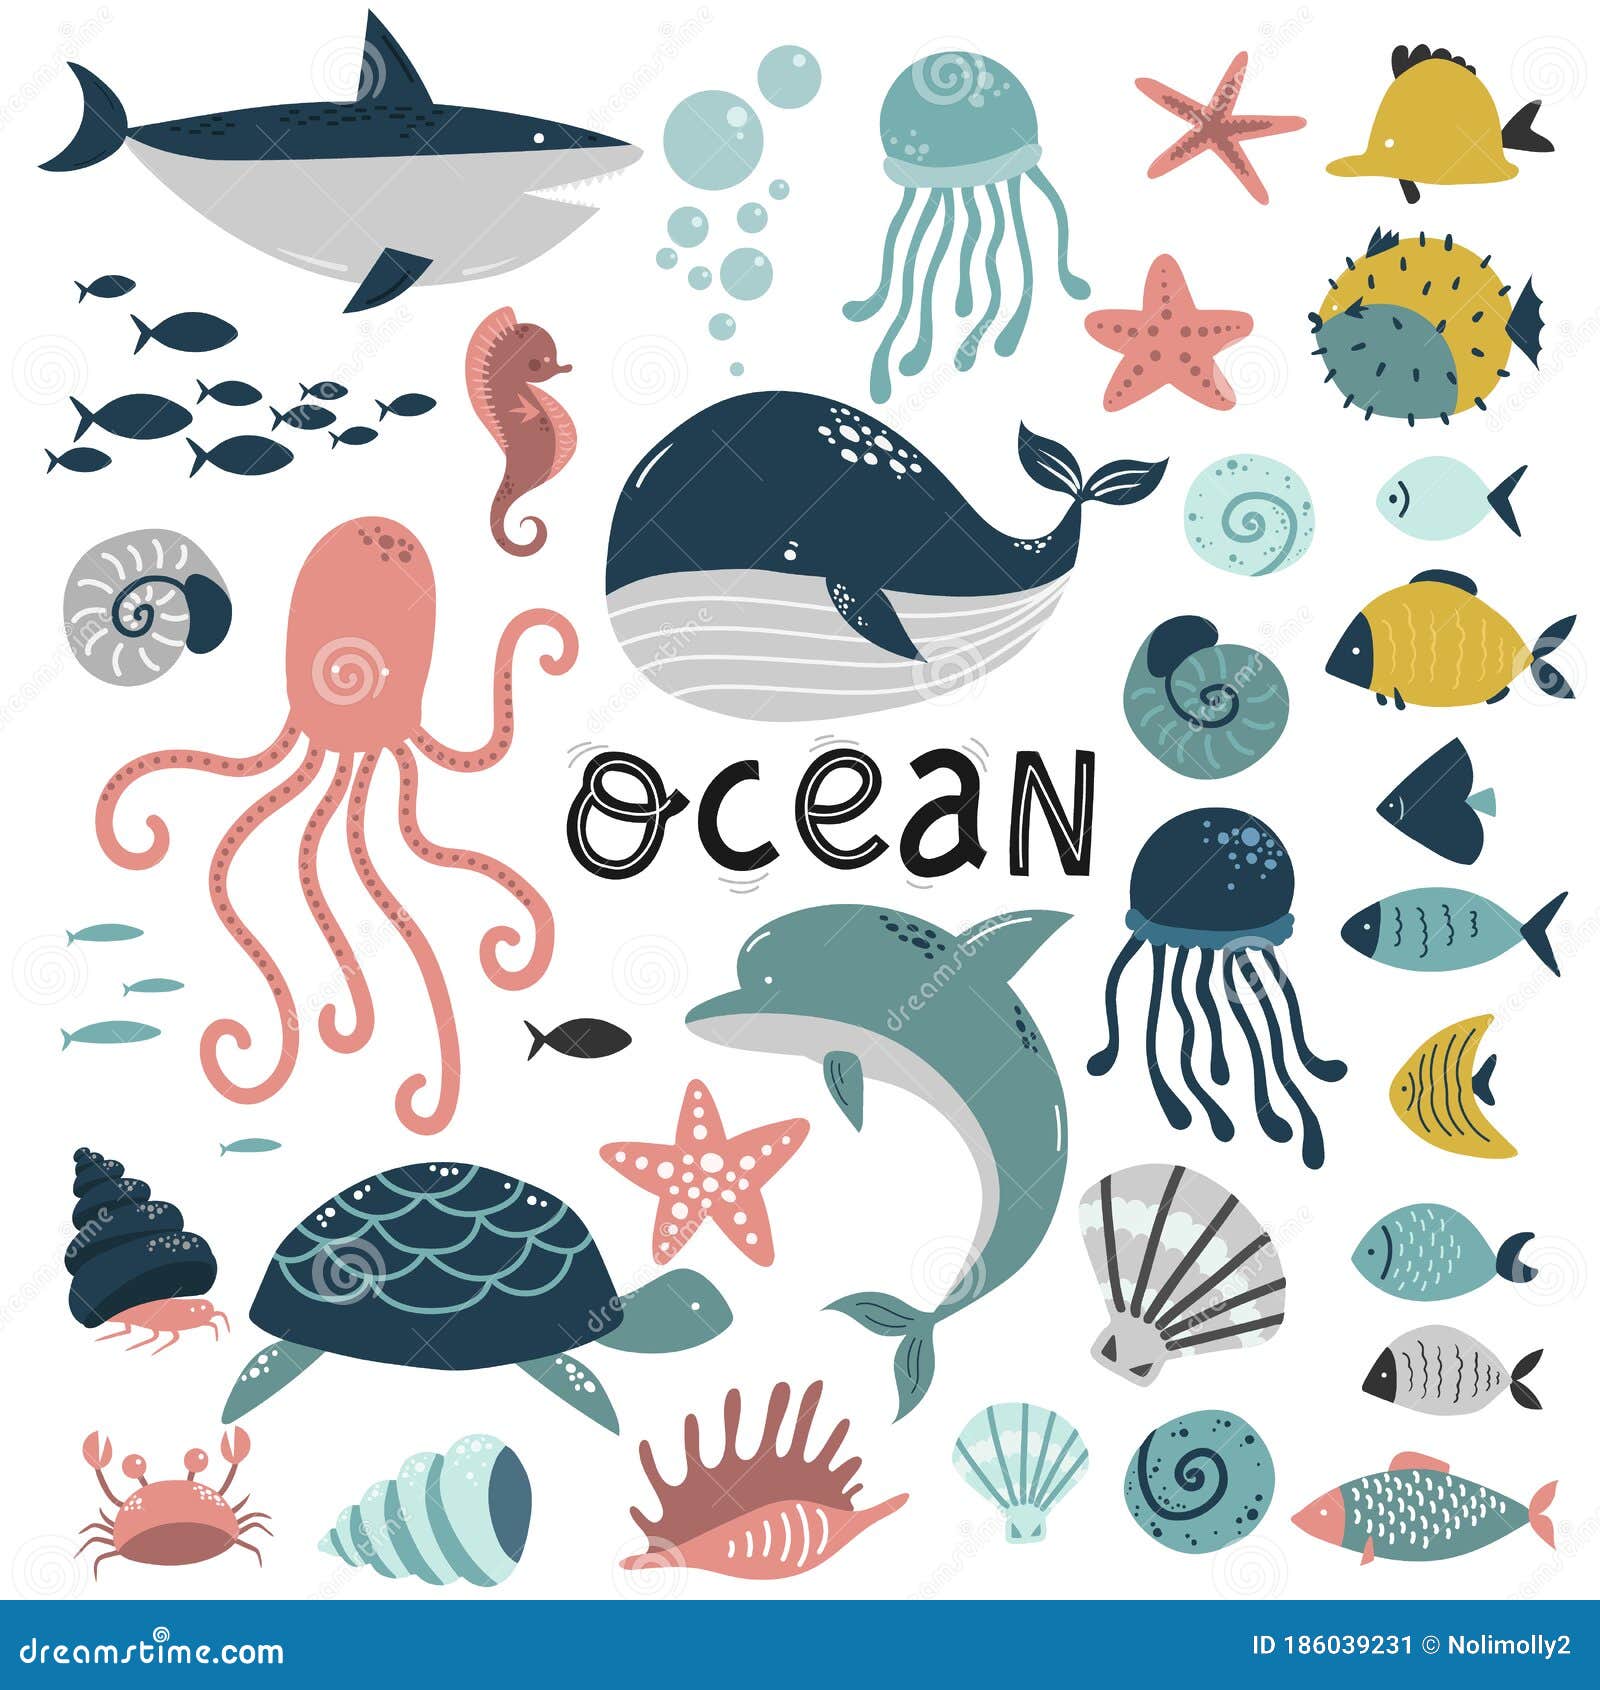 Underwater World Elements Set, Sea Ocean, Cute Animals Jellyfish and Fish,  Blue Whale and Shark, Vector Illustration Stock Vector - Illustration of  template, underwater: 186039231